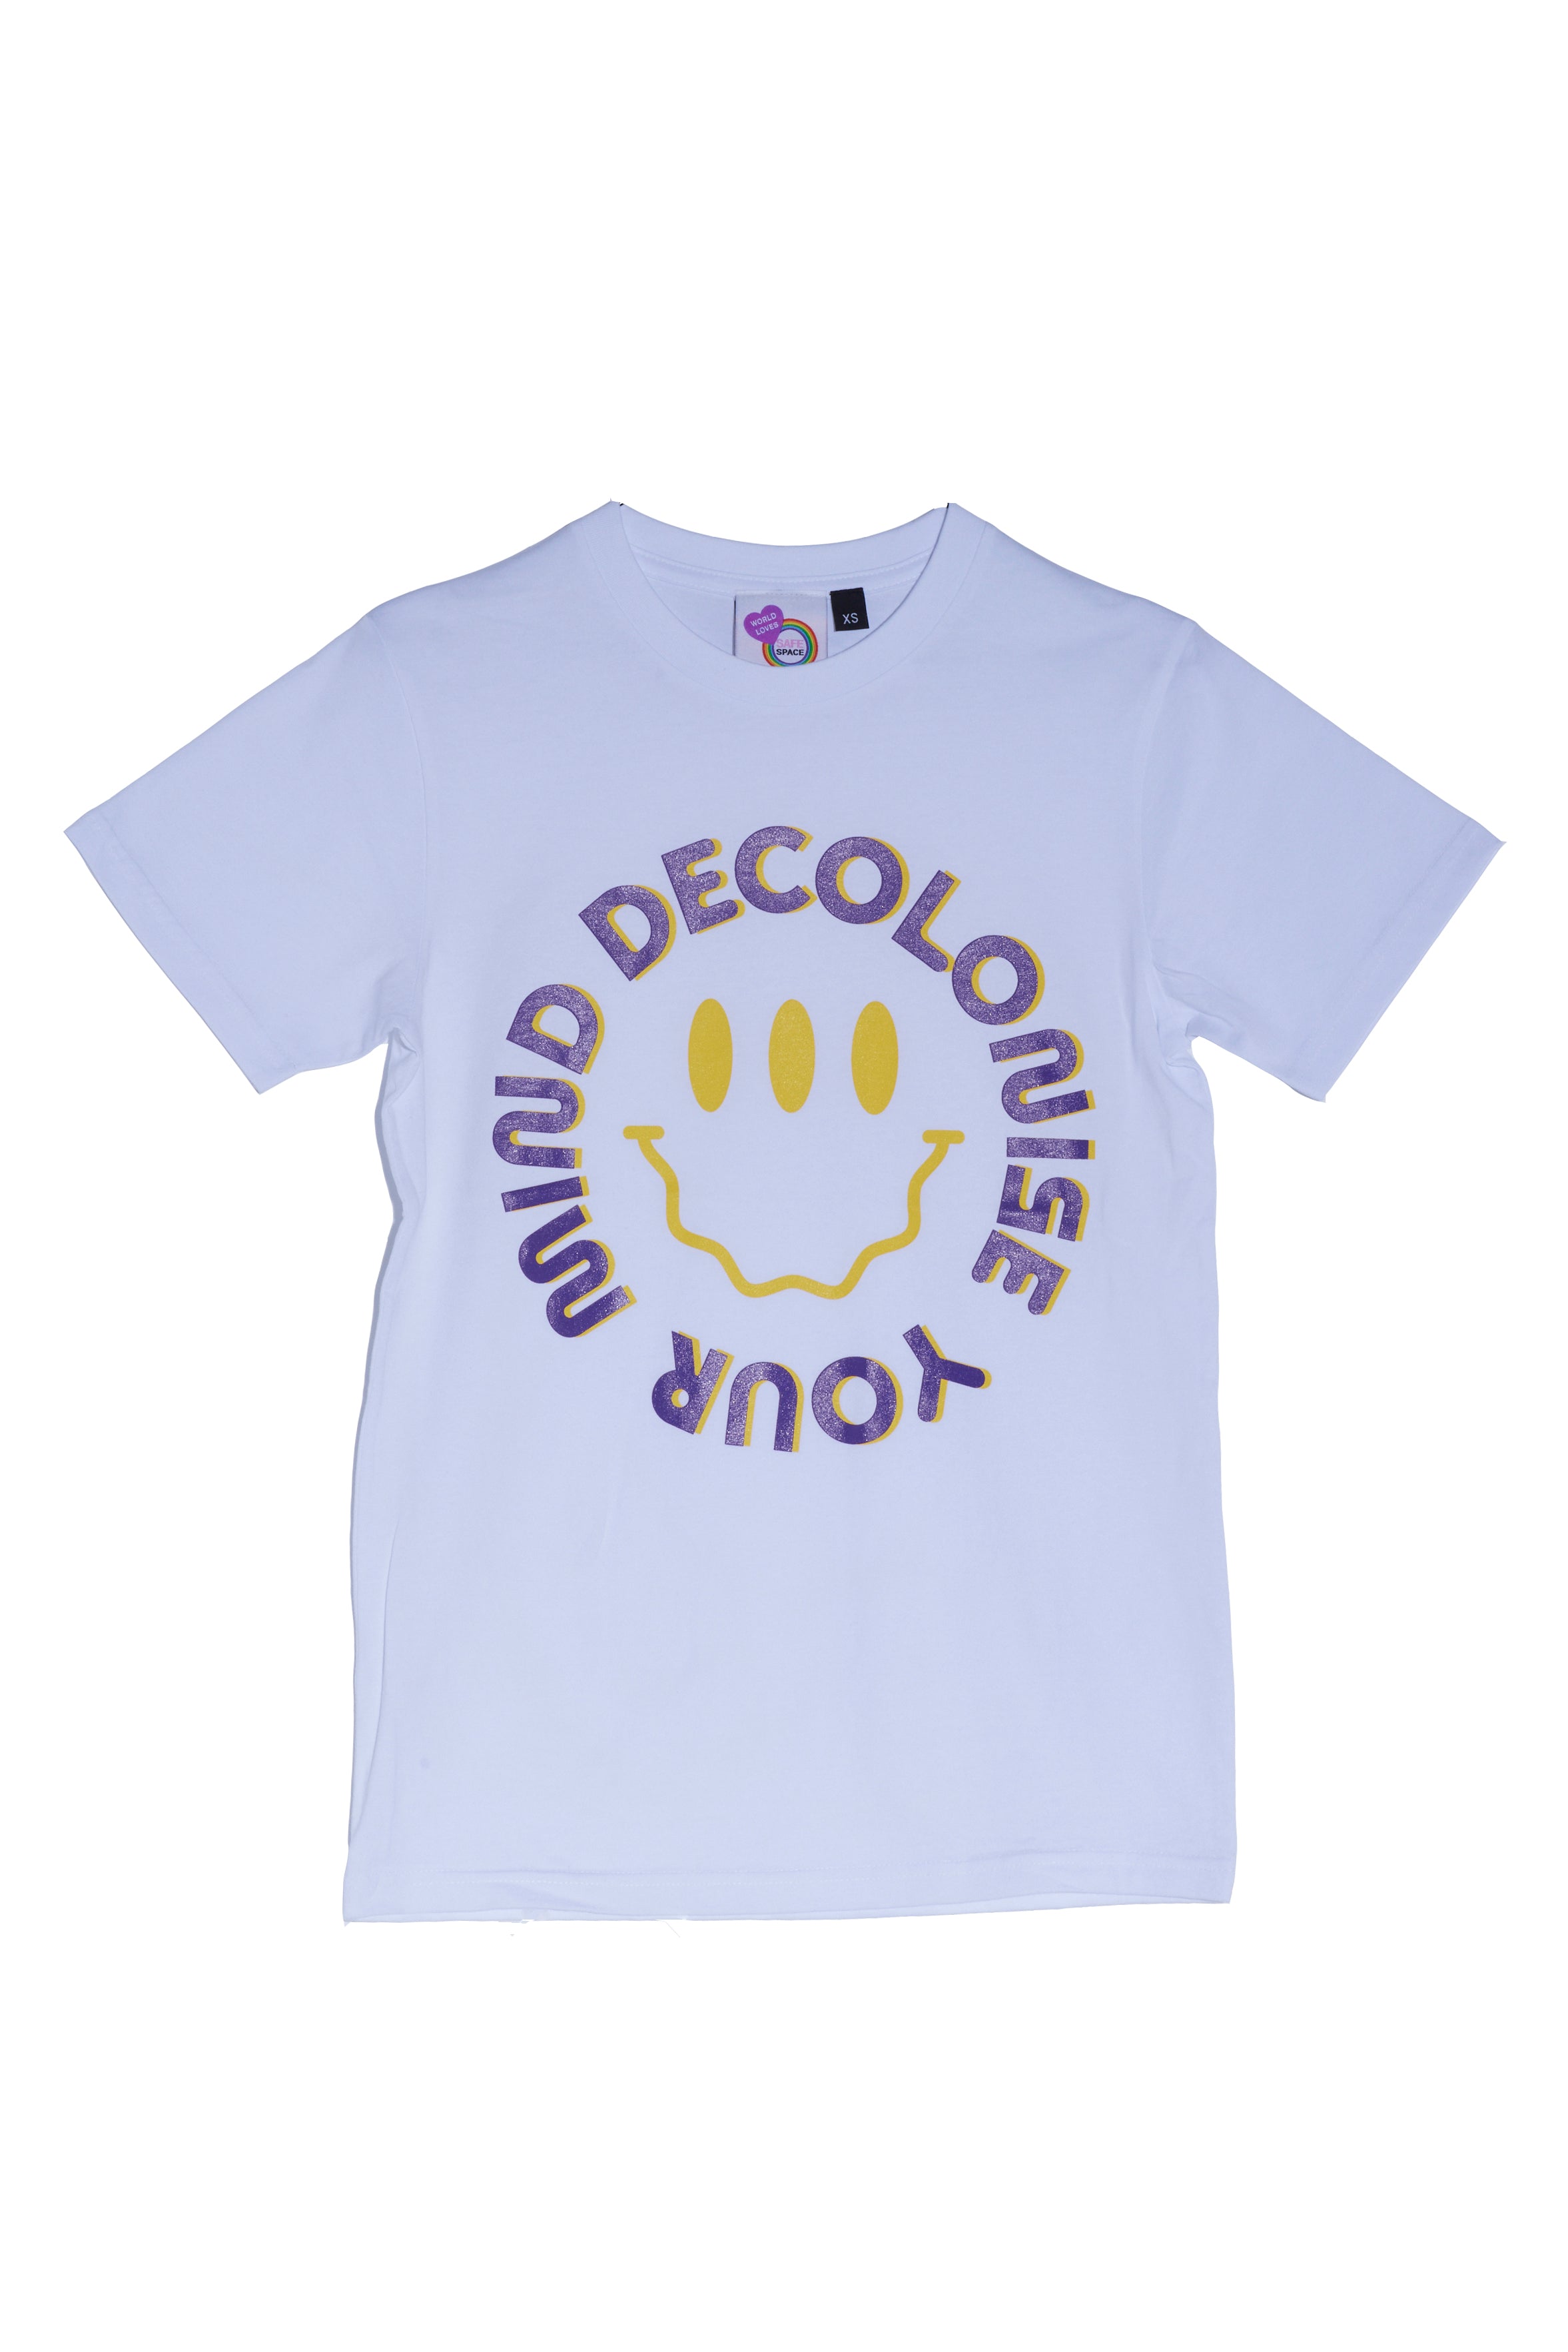 WORLD Love SAFE SPACE T-Shirt - Decolonise Your Mind - White (UNISEX)